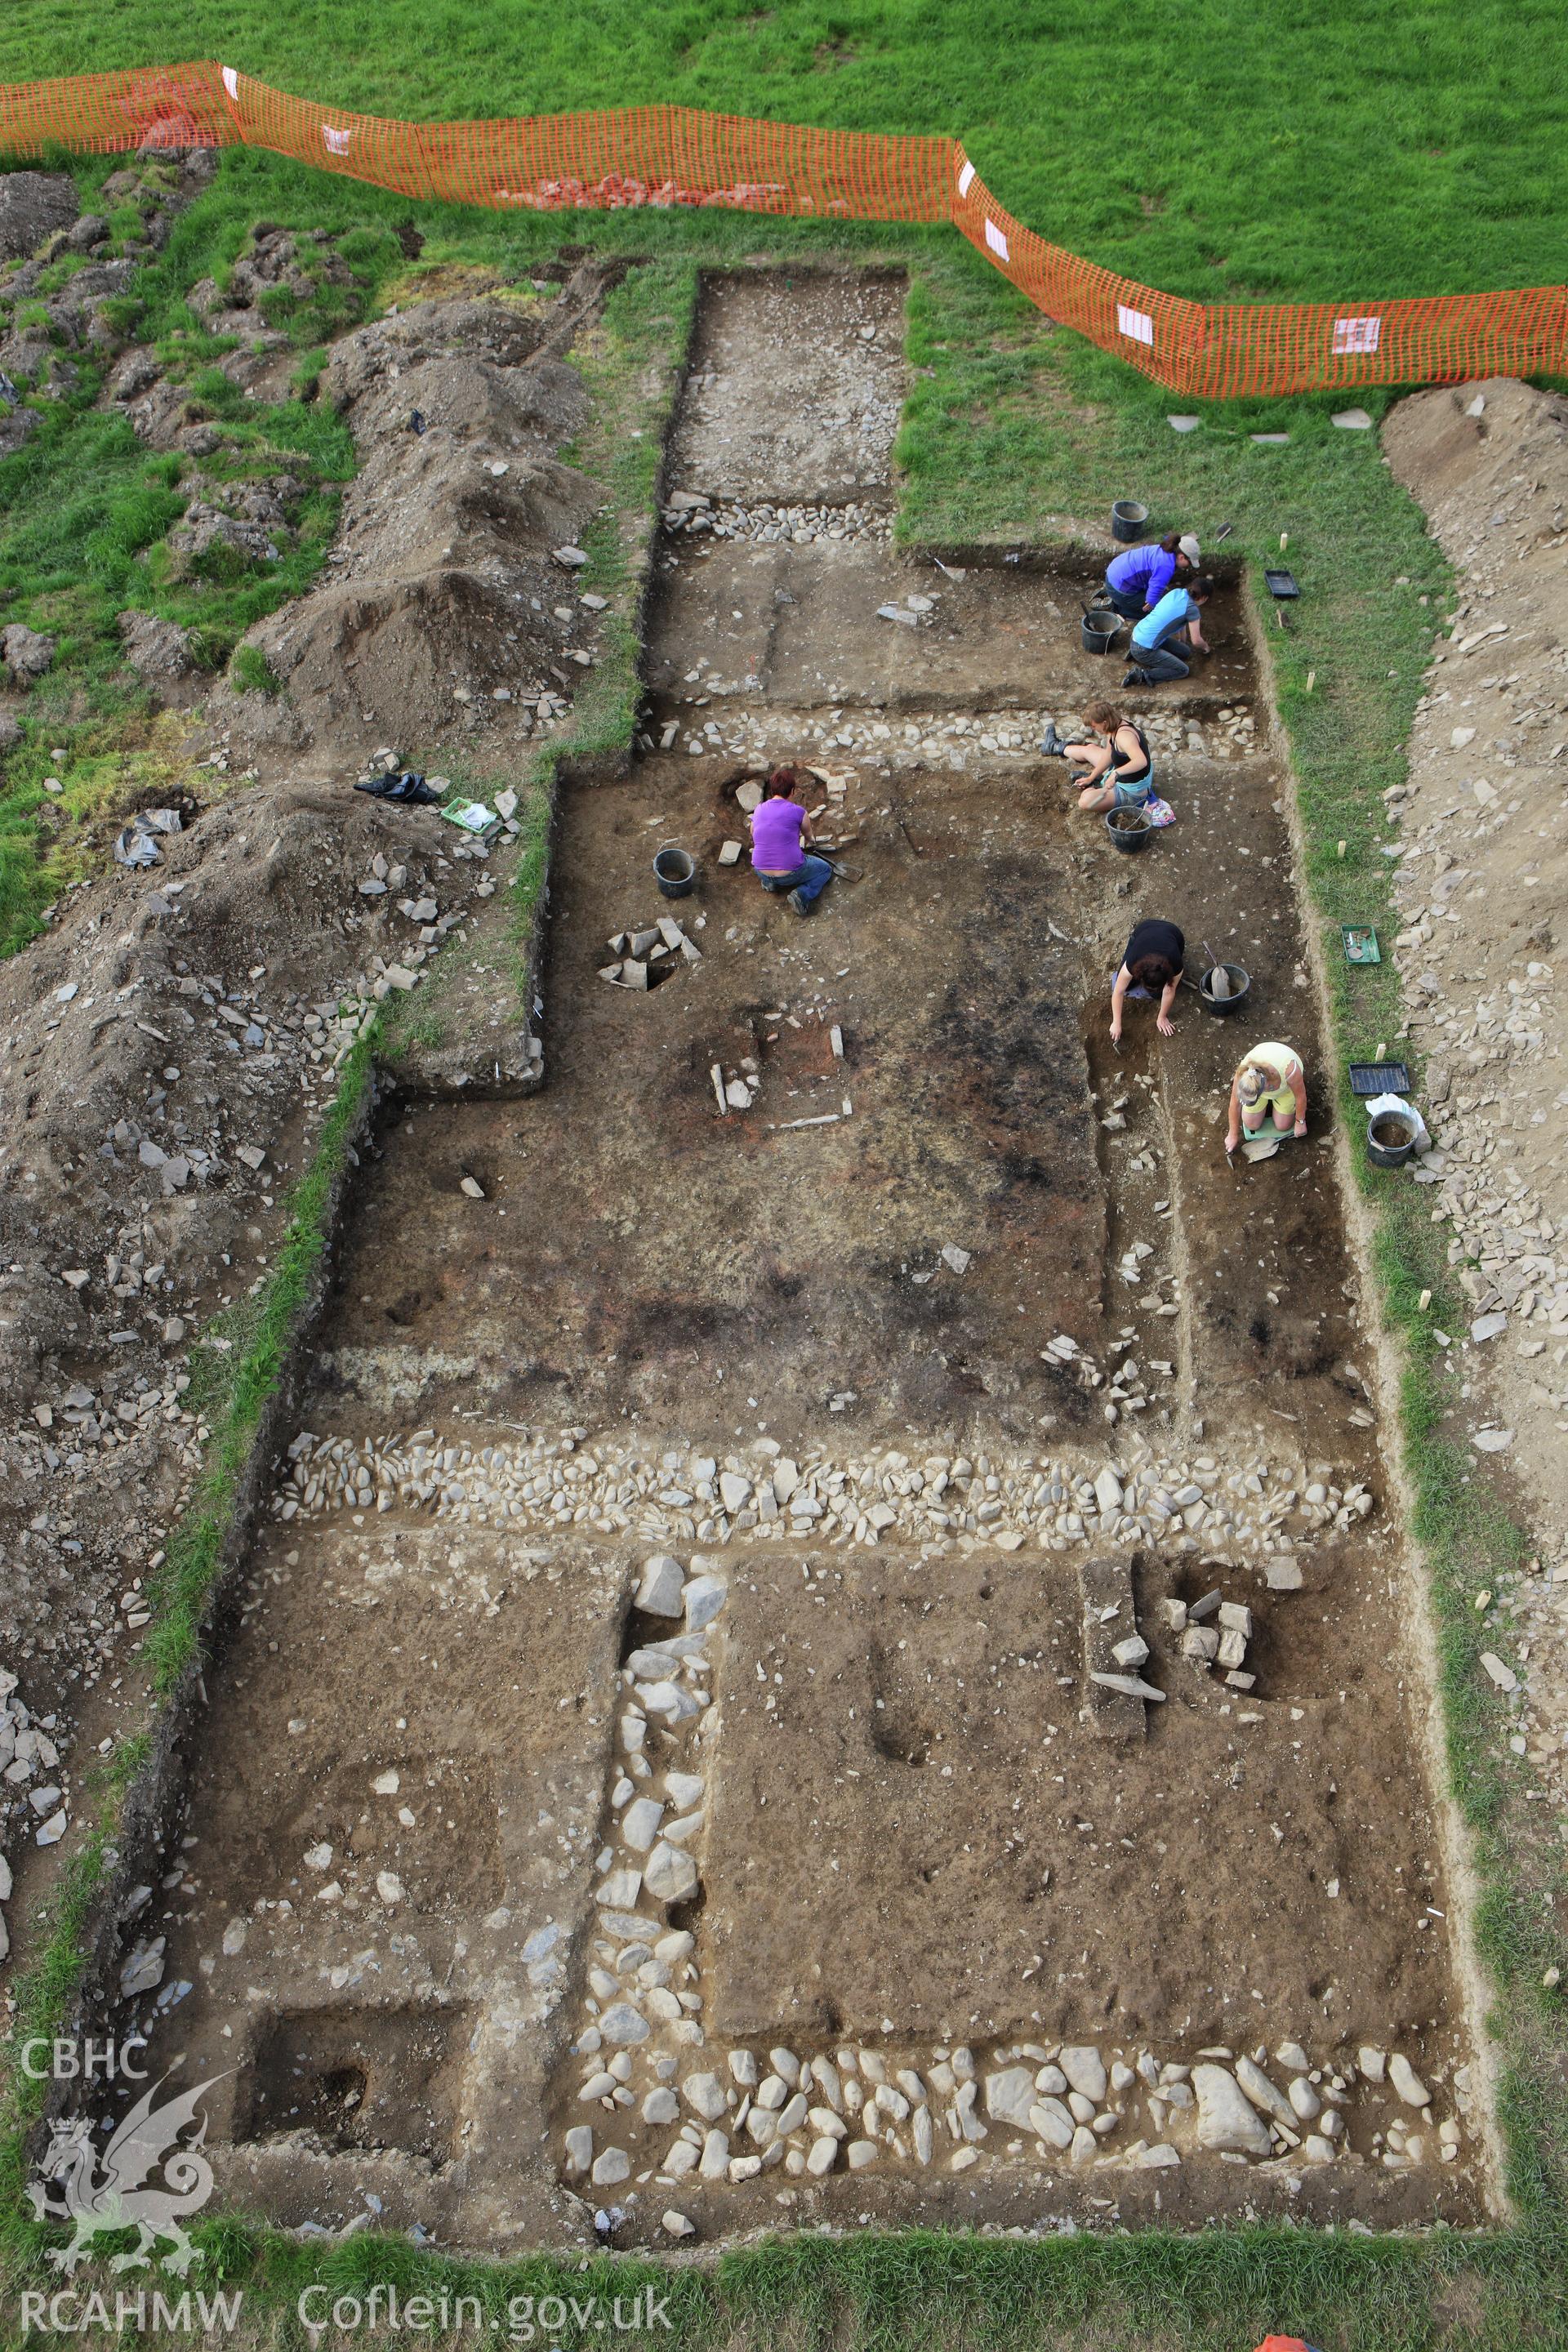 Arch Camb 167 (2018) 143-219. "The Romano-British villa at Abermagwr, Ceredigion: excavations 2010-2015" by Davies and Driver. Fig 6 high view of trenches A and C under excavation, July 2011.